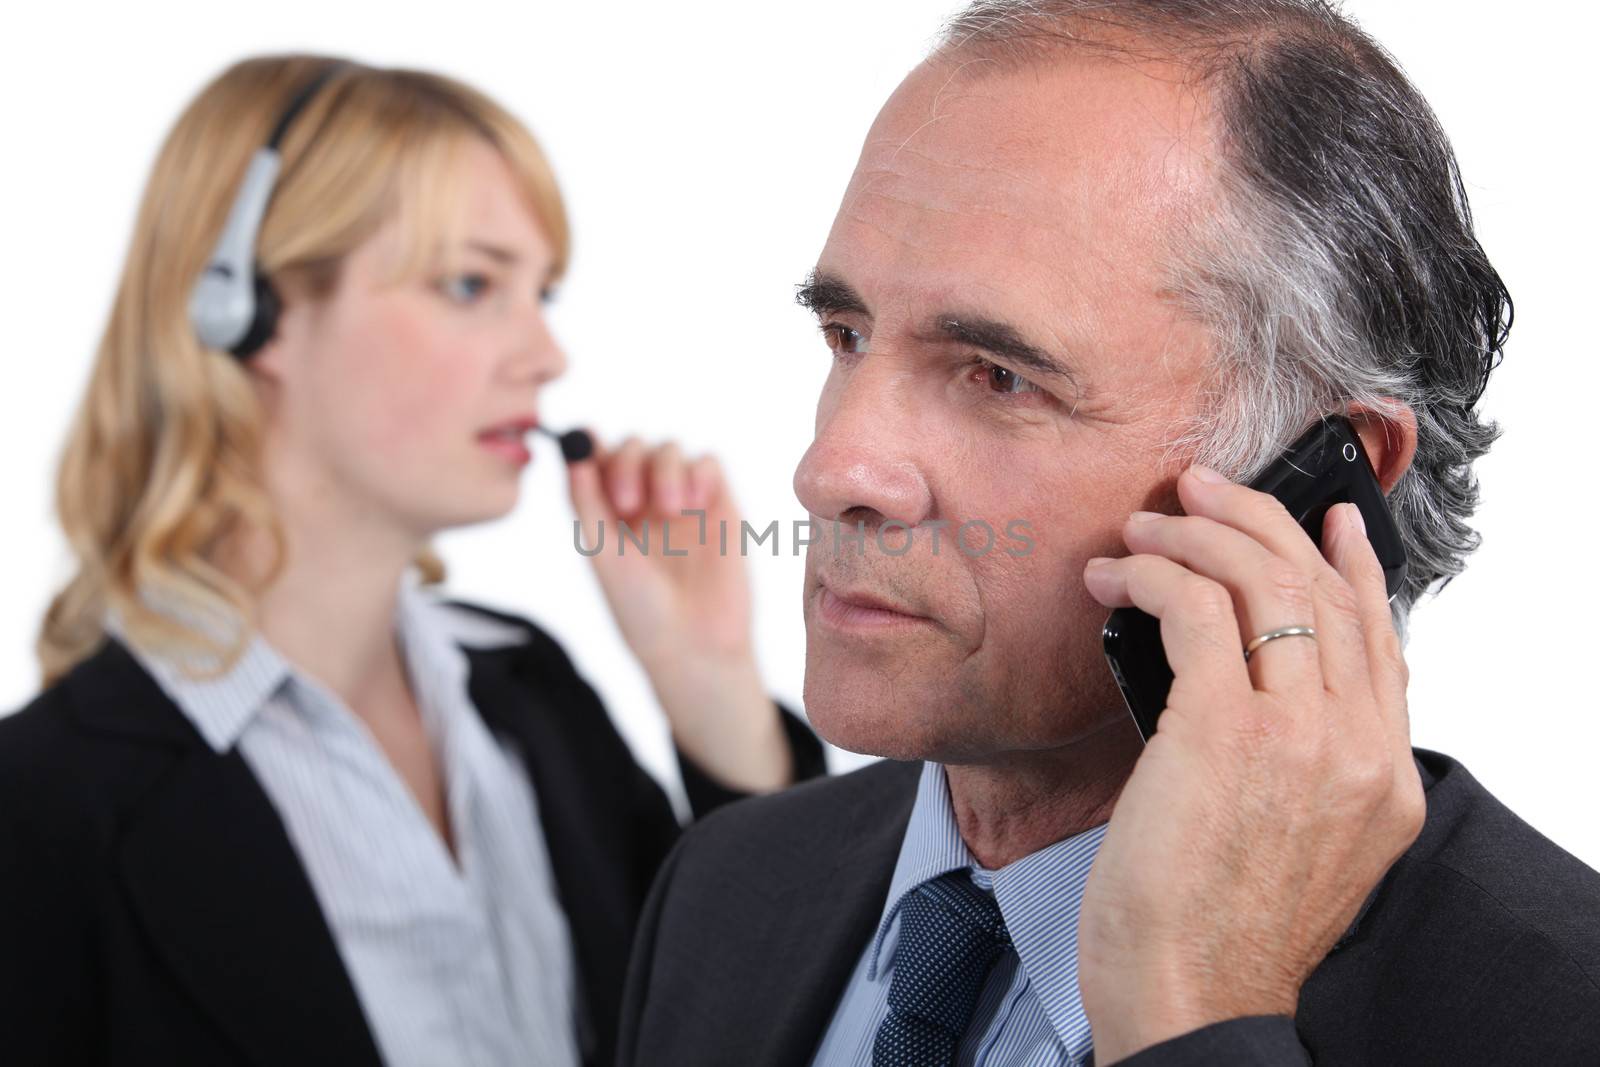 Businesspeople making phone calls by phovoir